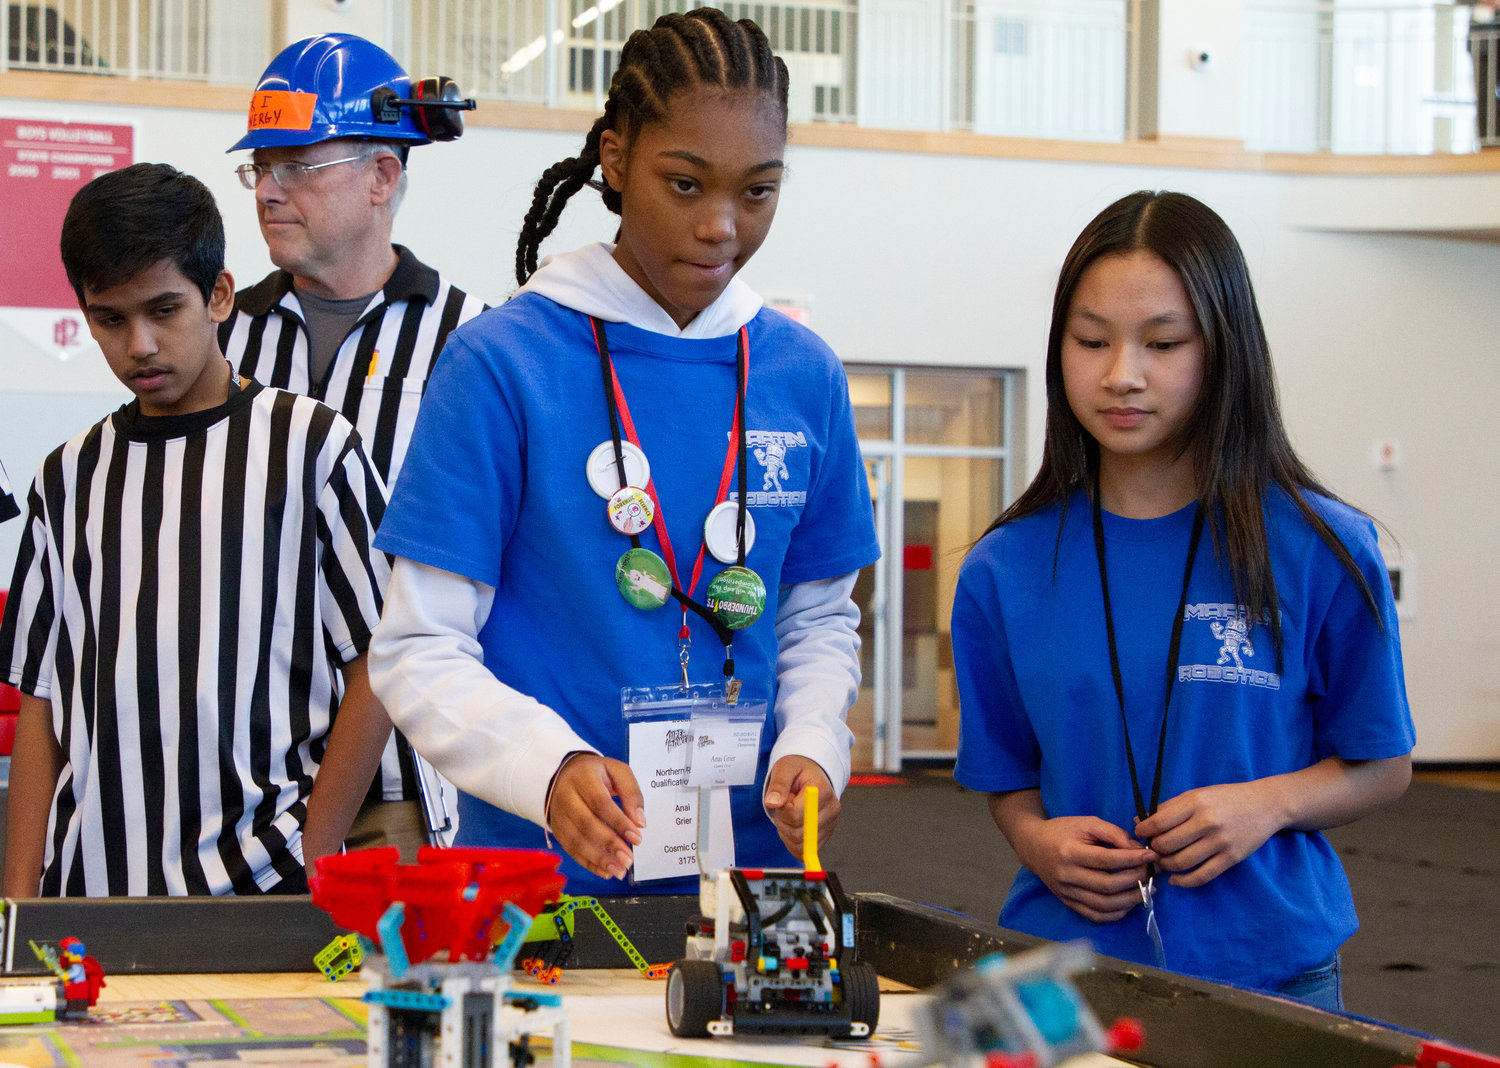 Martin students Anai Greer (left) and Caitlin Chiong operate their robot.